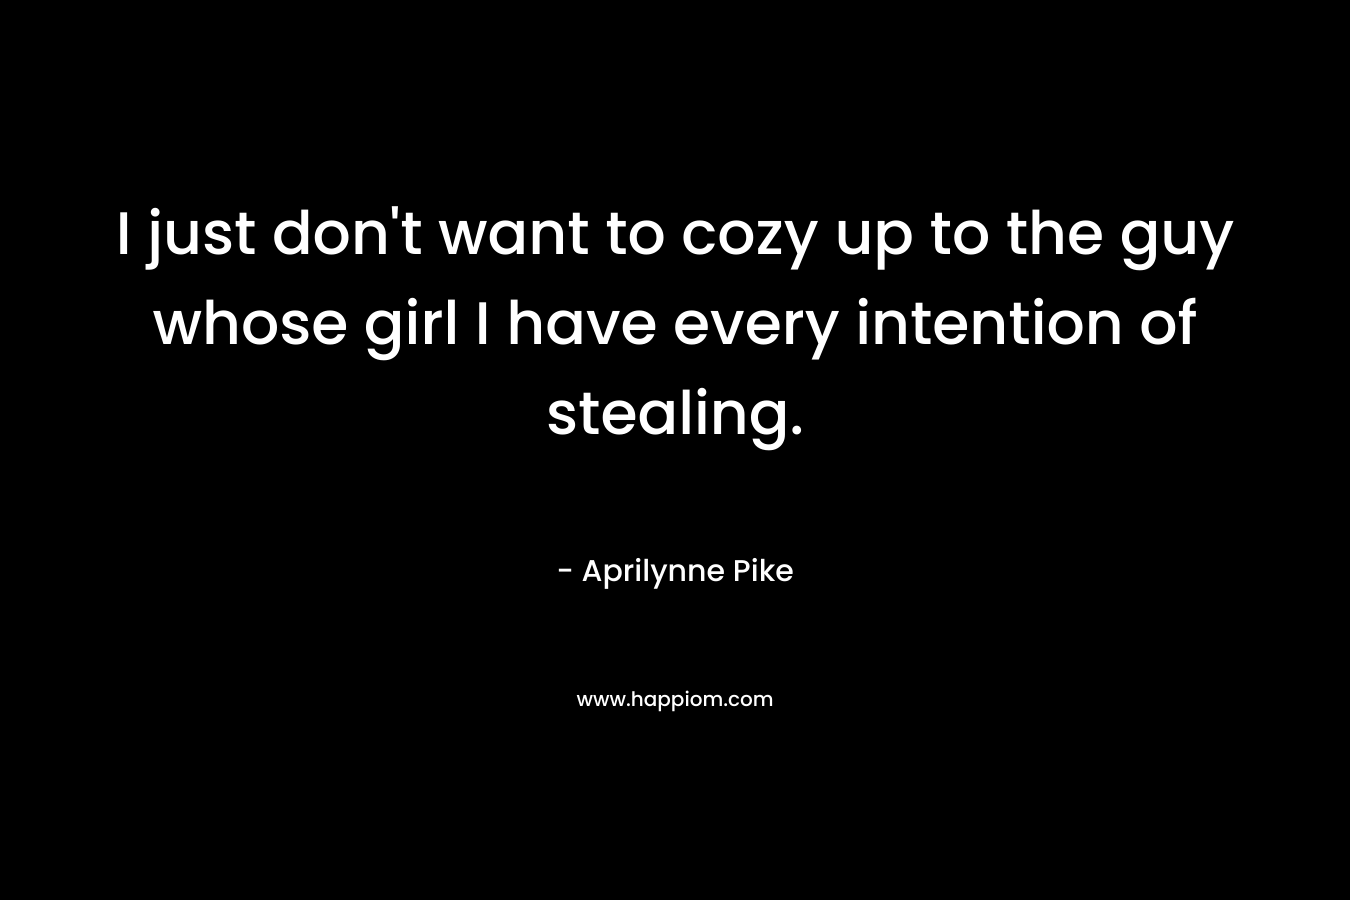 I just don’t want to cozy up to the guy whose girl I have every intention of stealing. – Aprilynne Pike